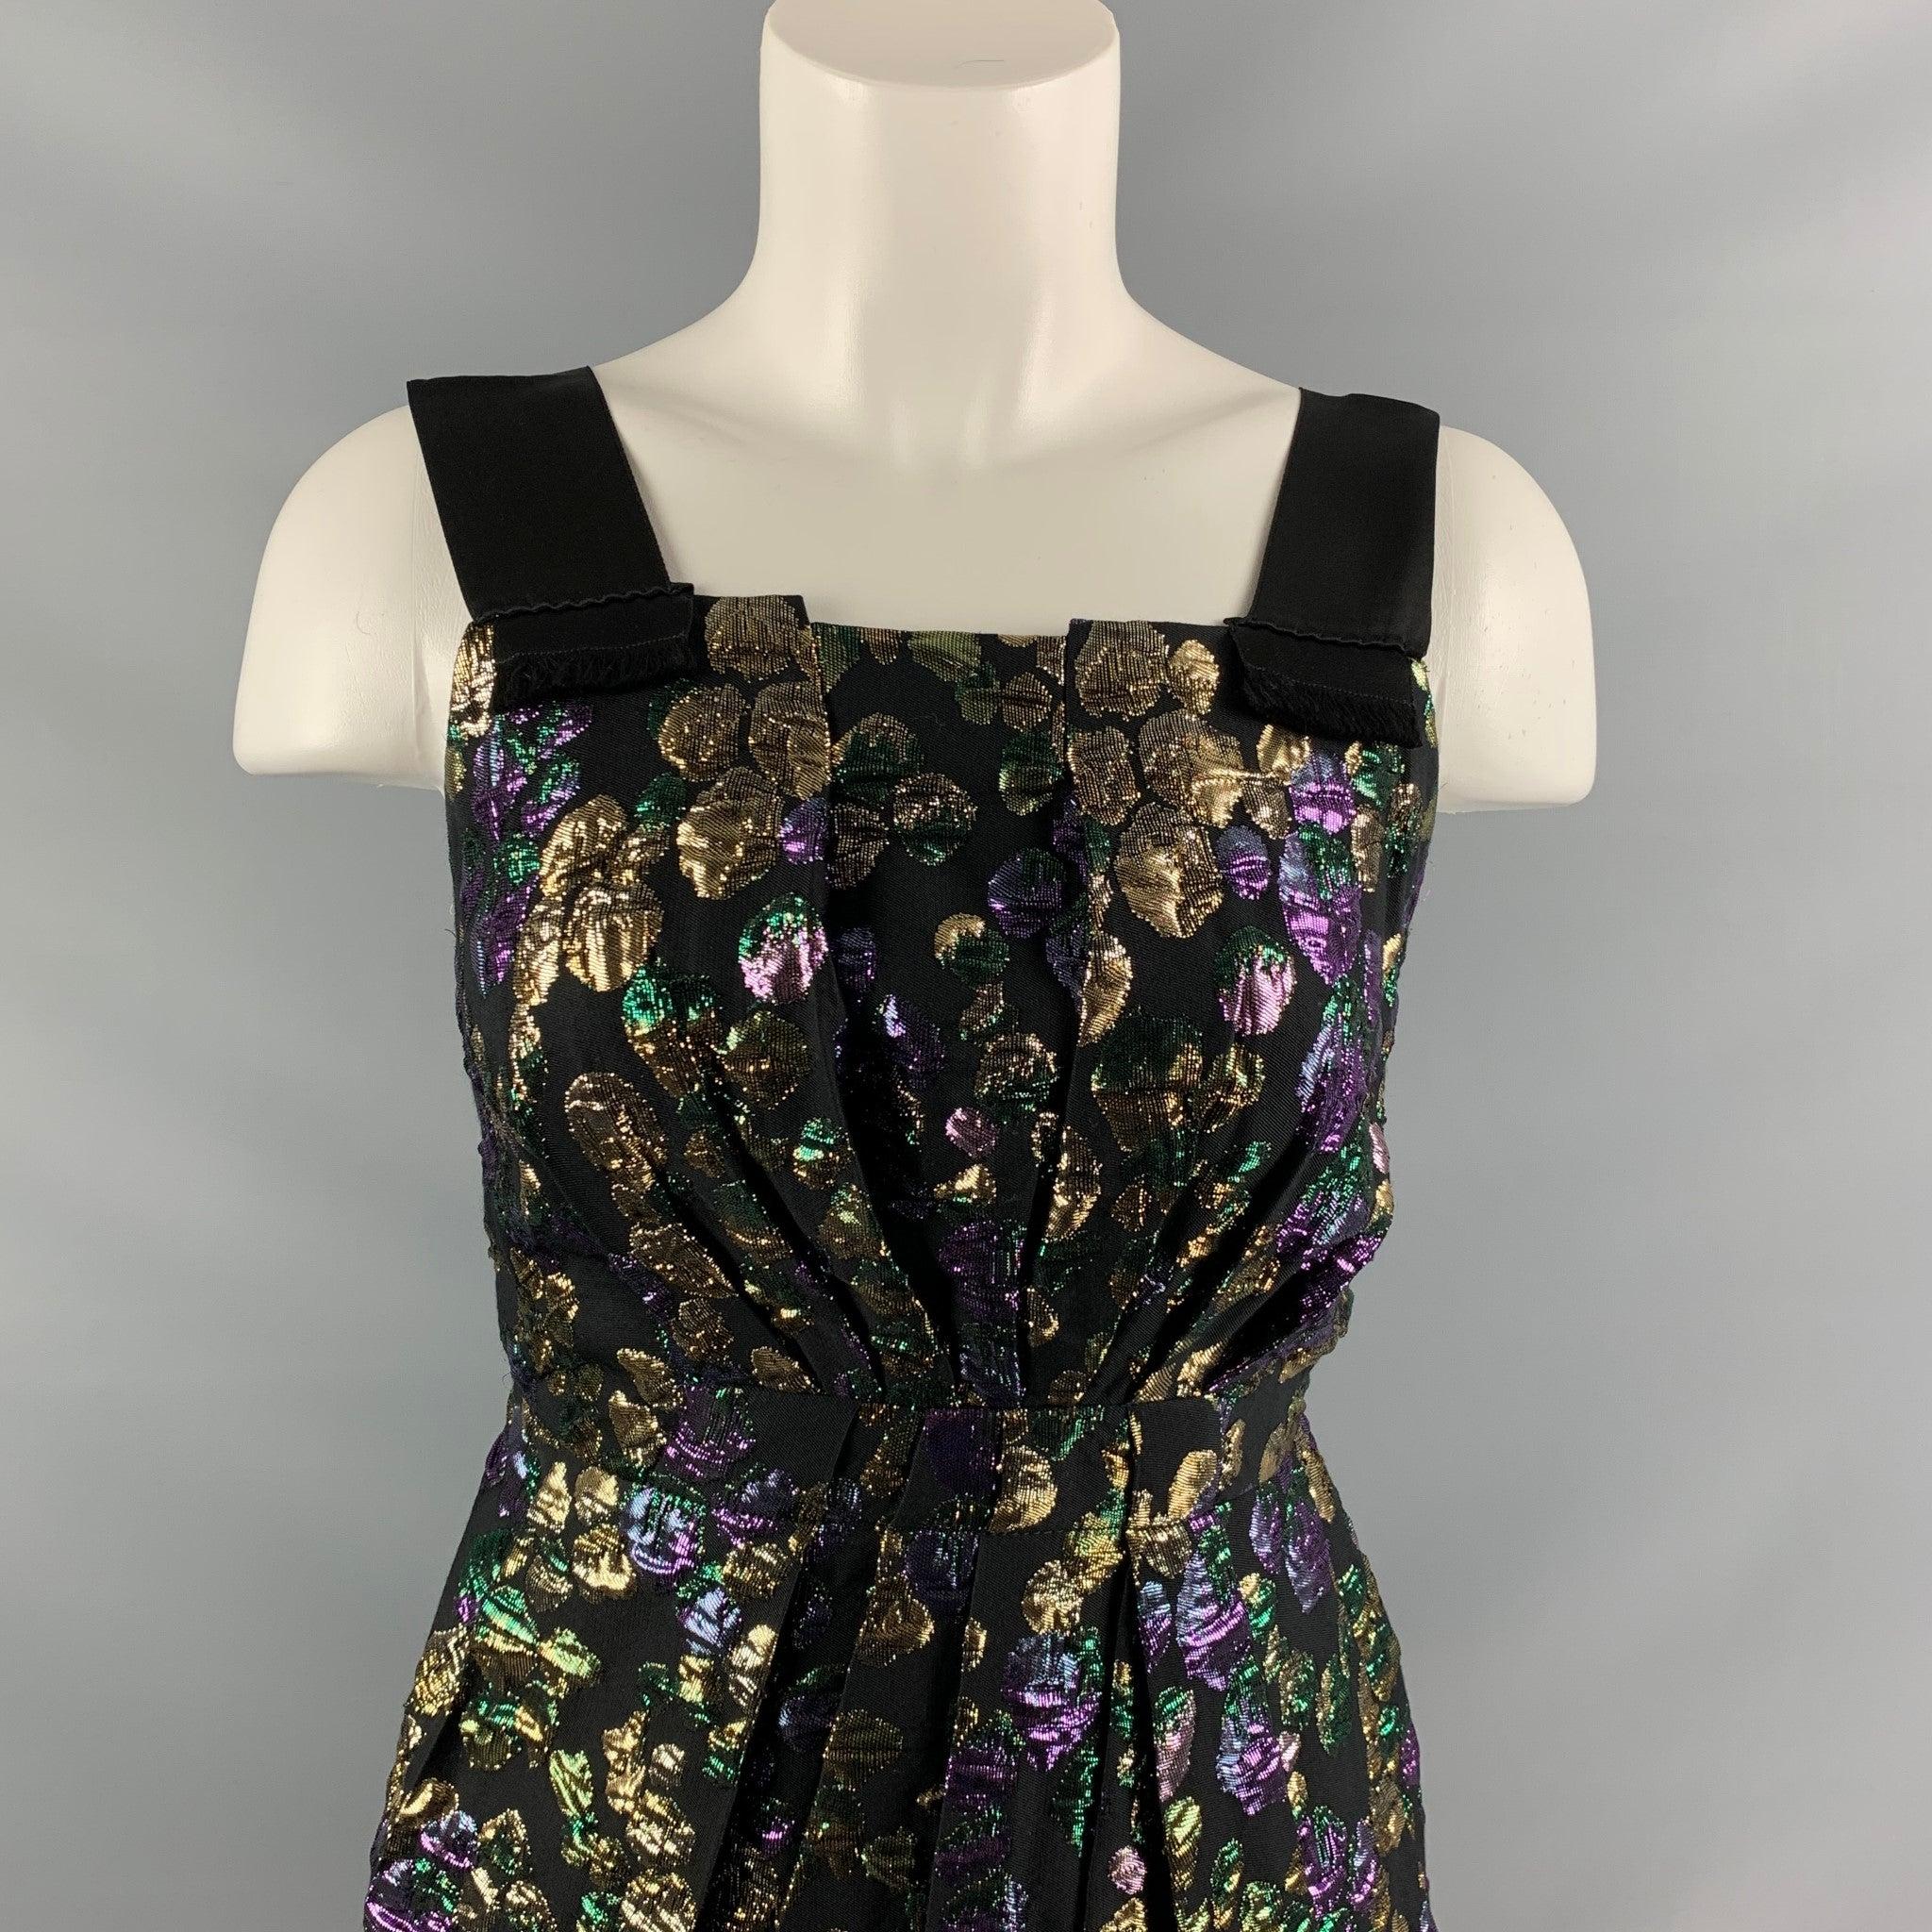 MARC JACOBS cocktail dress comes in black, gold and purple cotton blend jacquard featuring rushed/pleated detail at front and back and half zip closure at center back. Made in USA.Excellent Pre-Owned Condition. 

Marked:   2 

Measurements: 
